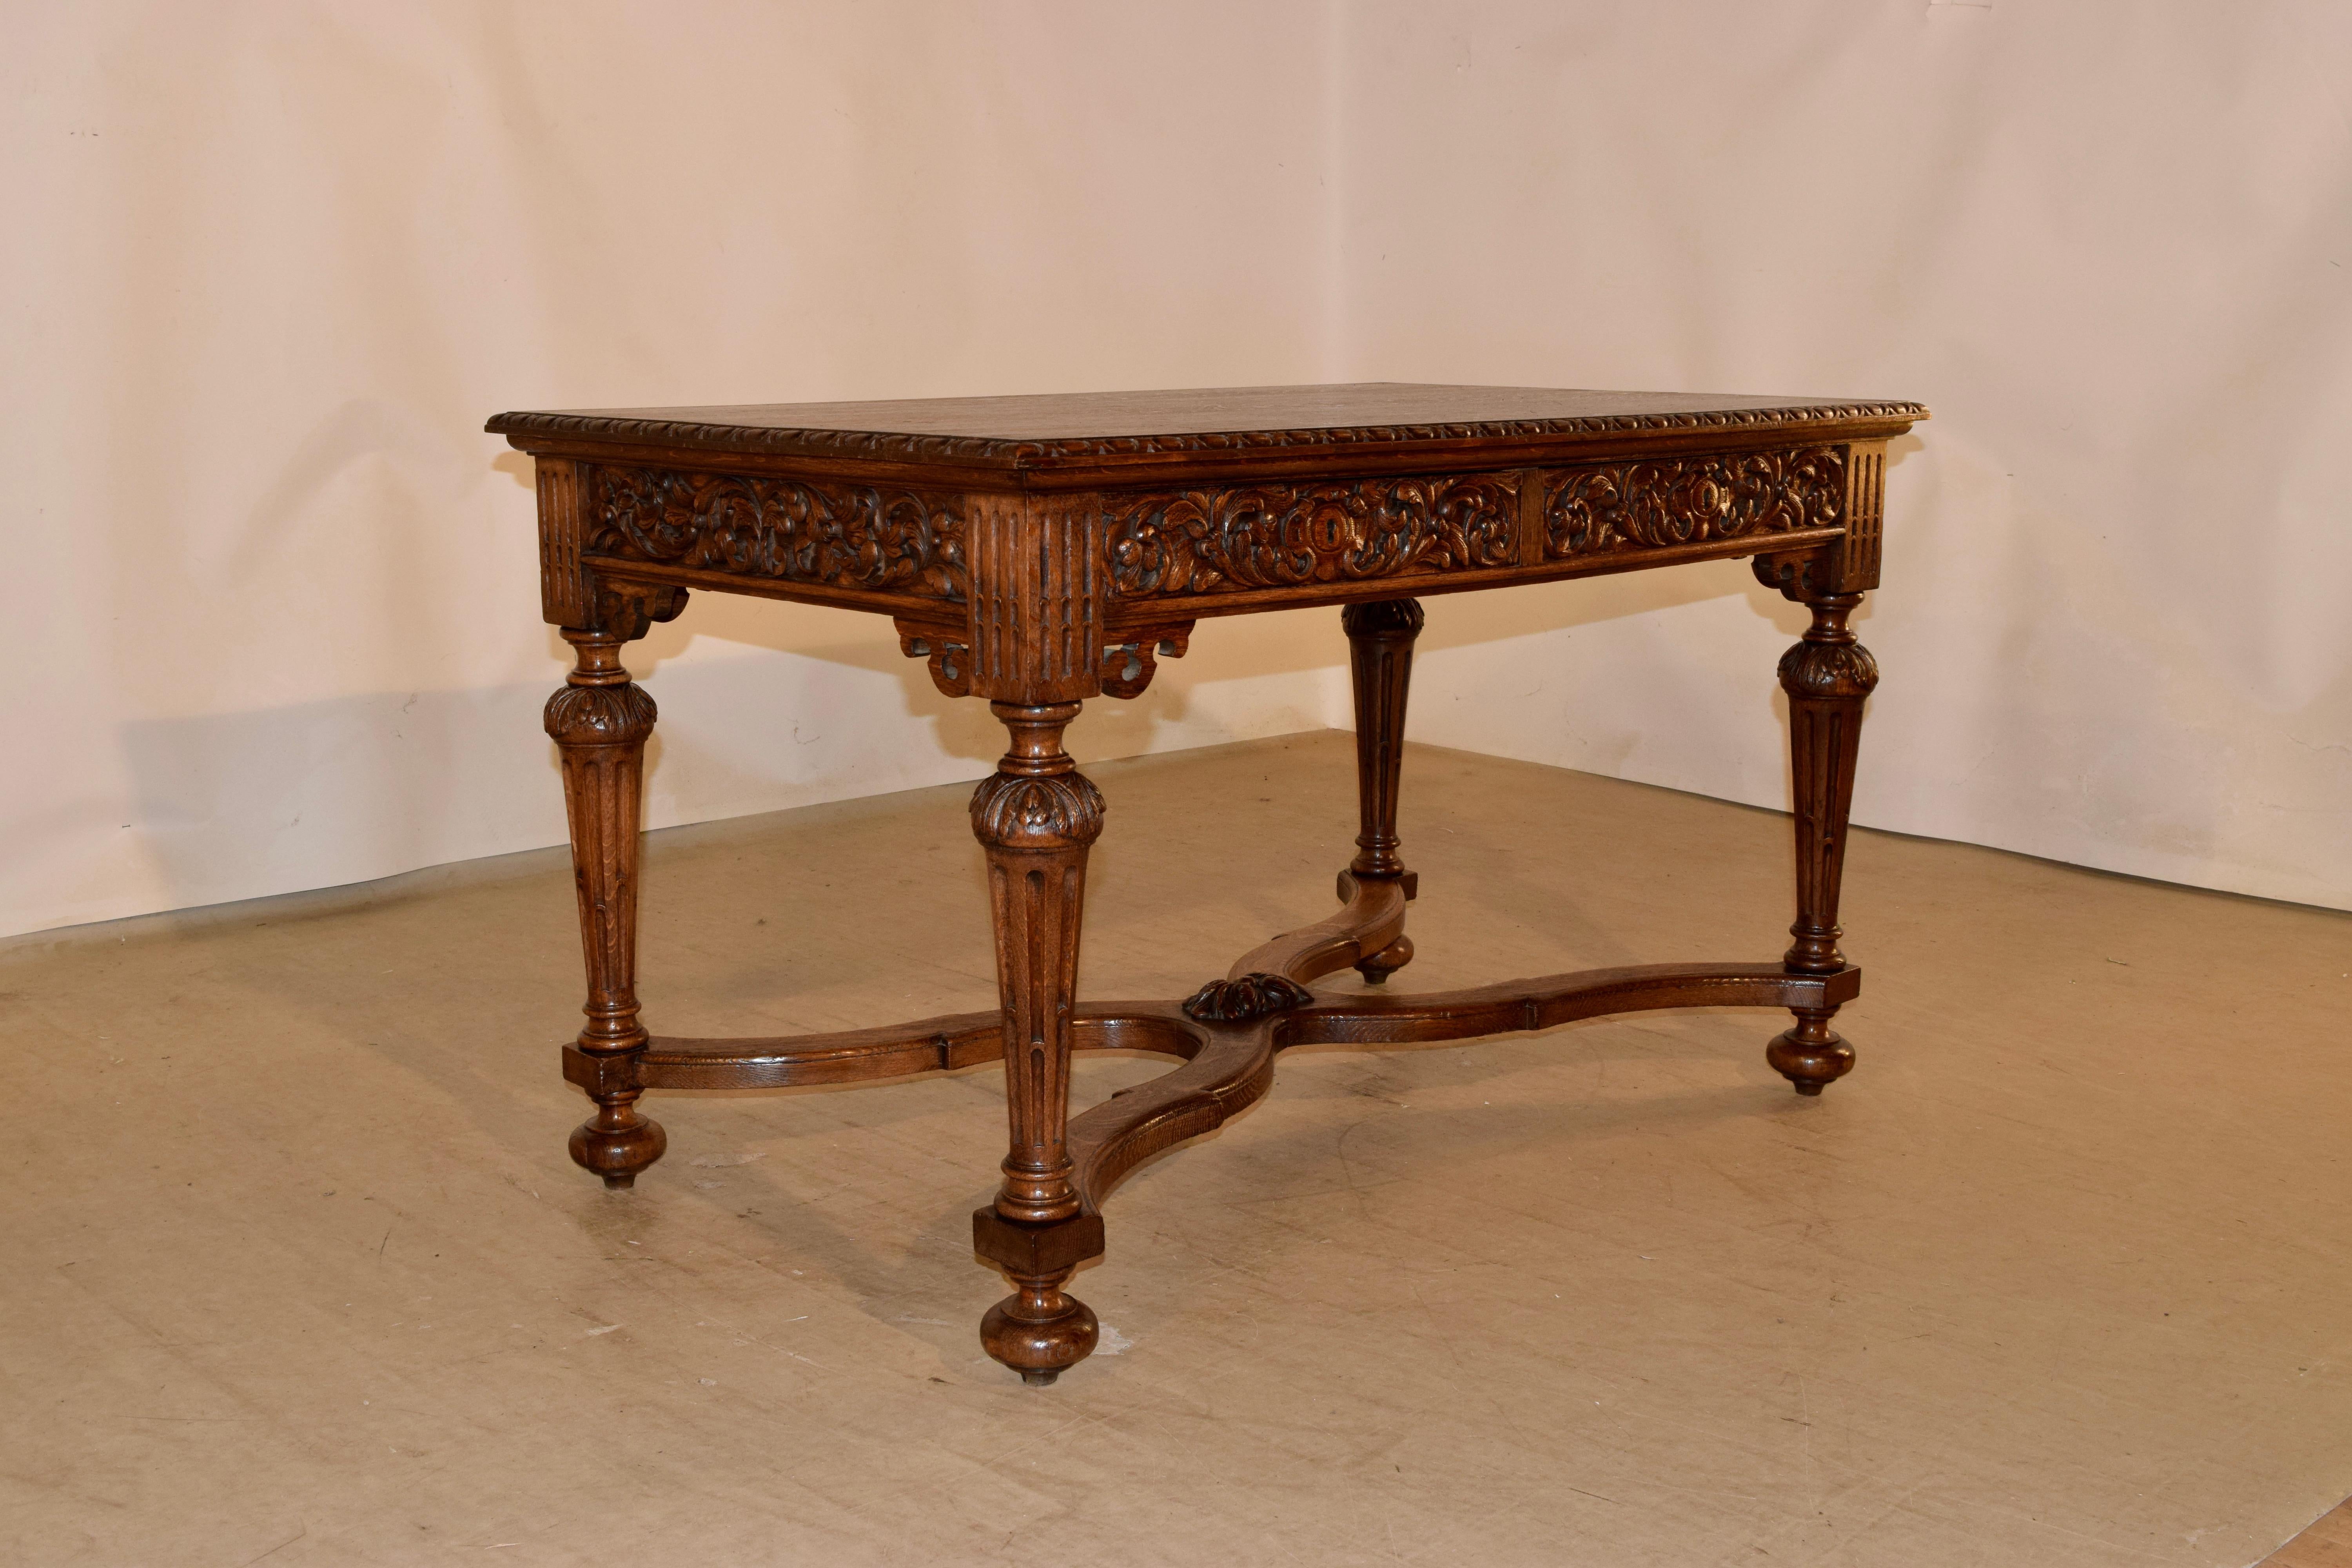 19th century library table from France with a hand carved decorated and beveled edge around the top, following down to a heavily carved apron on all four sides for easy placement in any room. The carving is of acanthus leaves and florals. There are